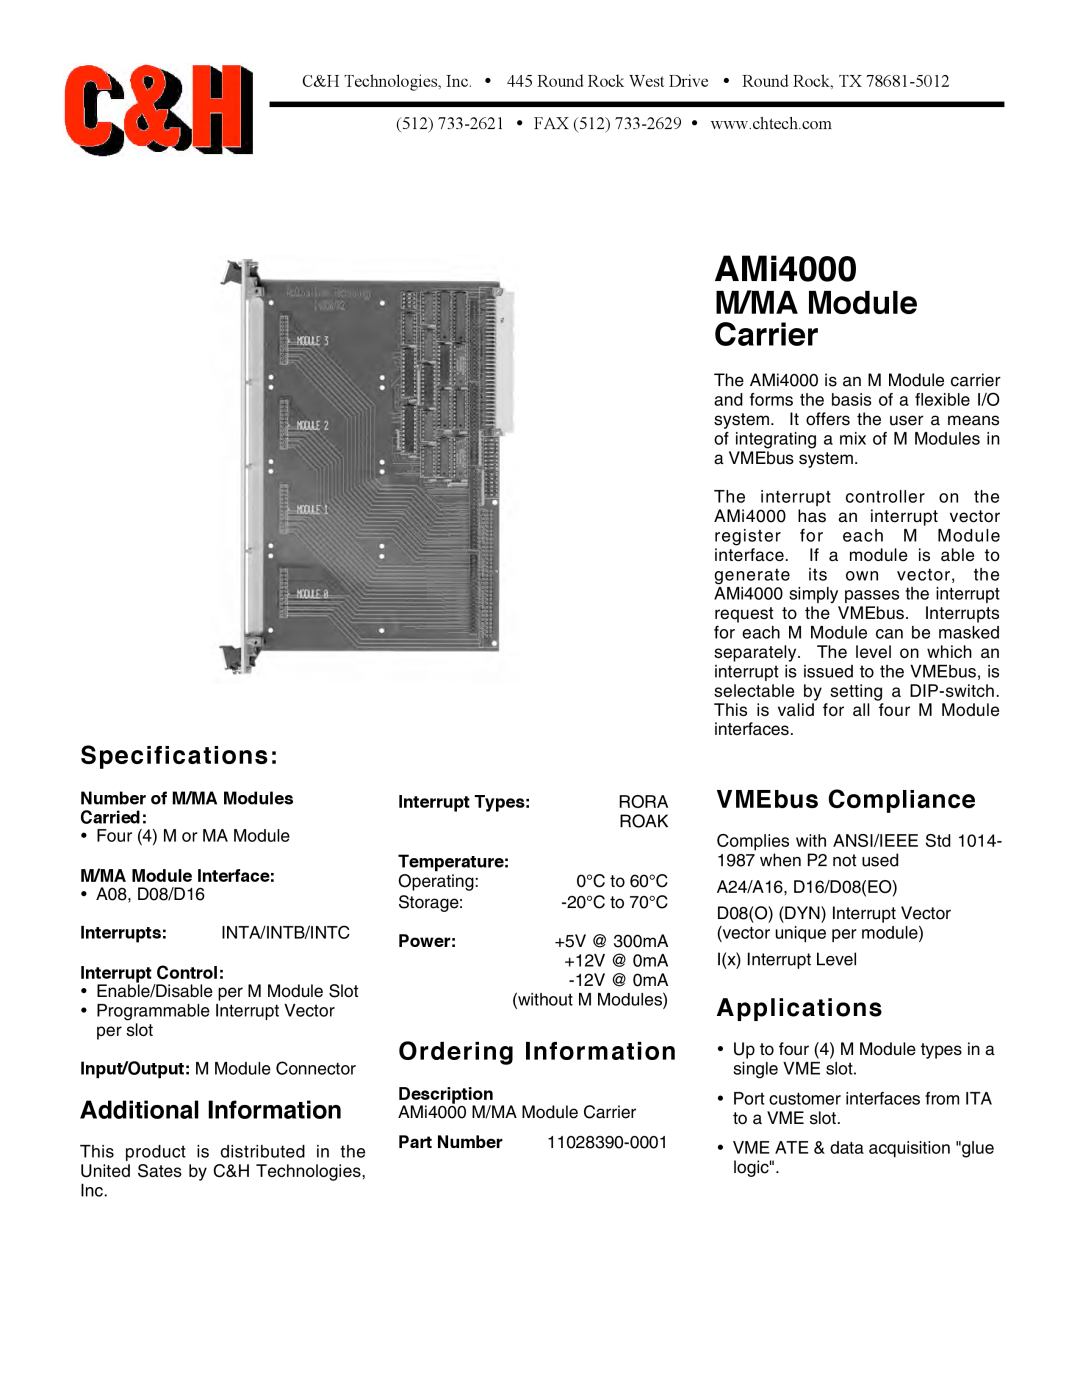 CH Tech AMi4000 specifications M/MA Module Carrier, Specifications, Additional Information, Ordering Information, Power 